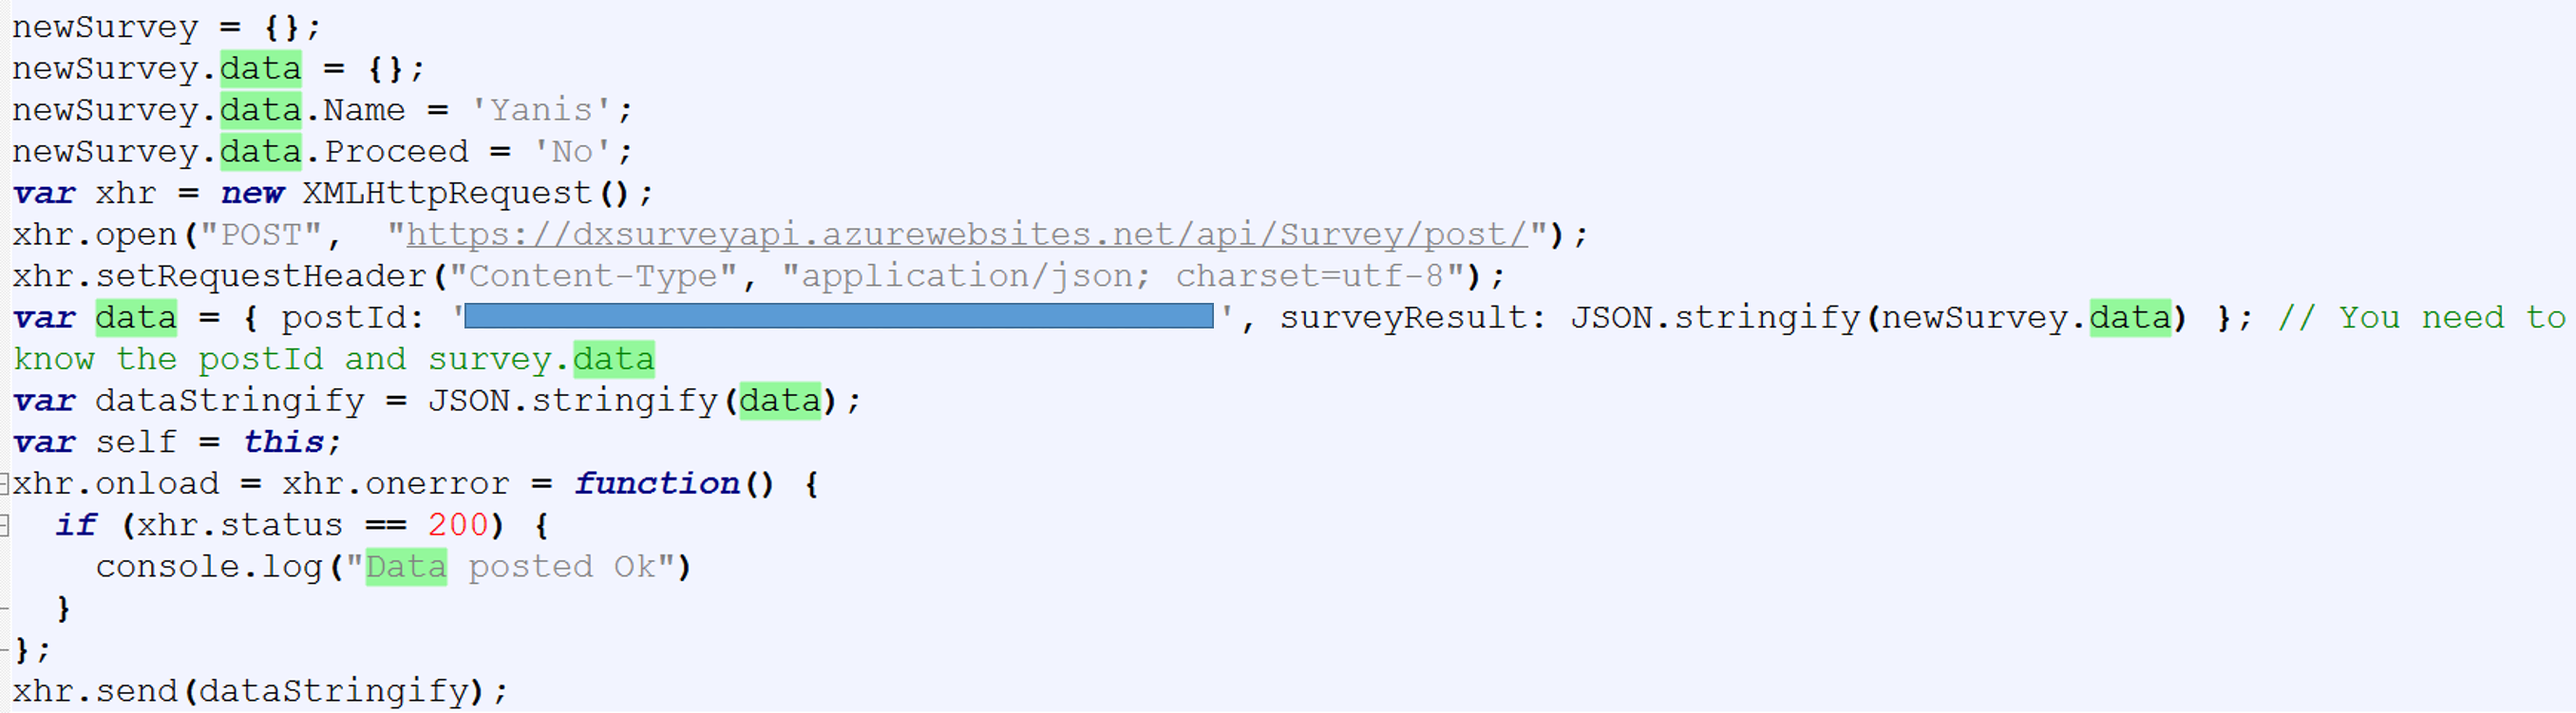 Posting to SurveyJS by running script in browser